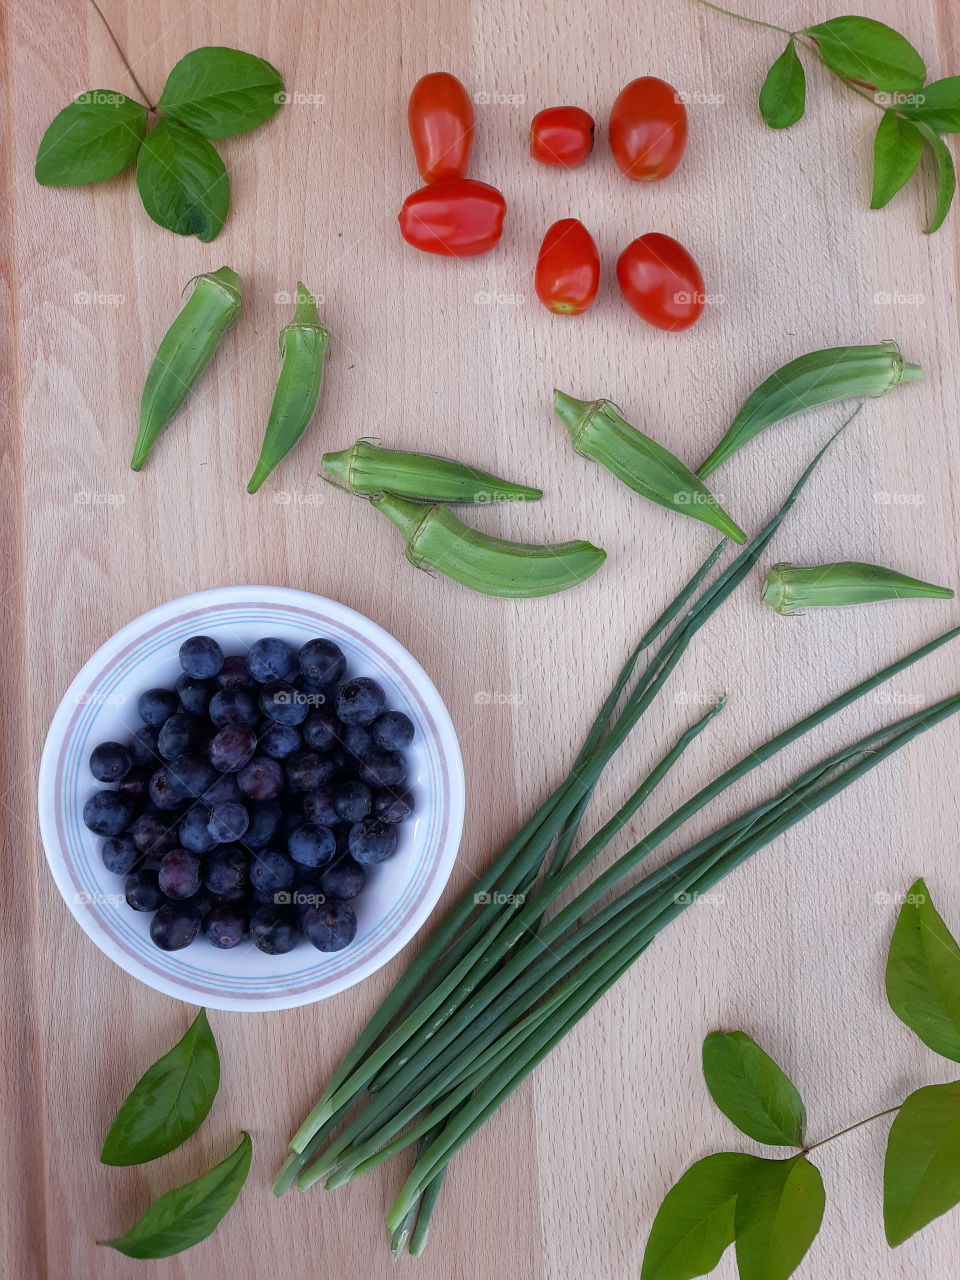 Garden haul with blueberries, onions, okra, and cherry tomatoes